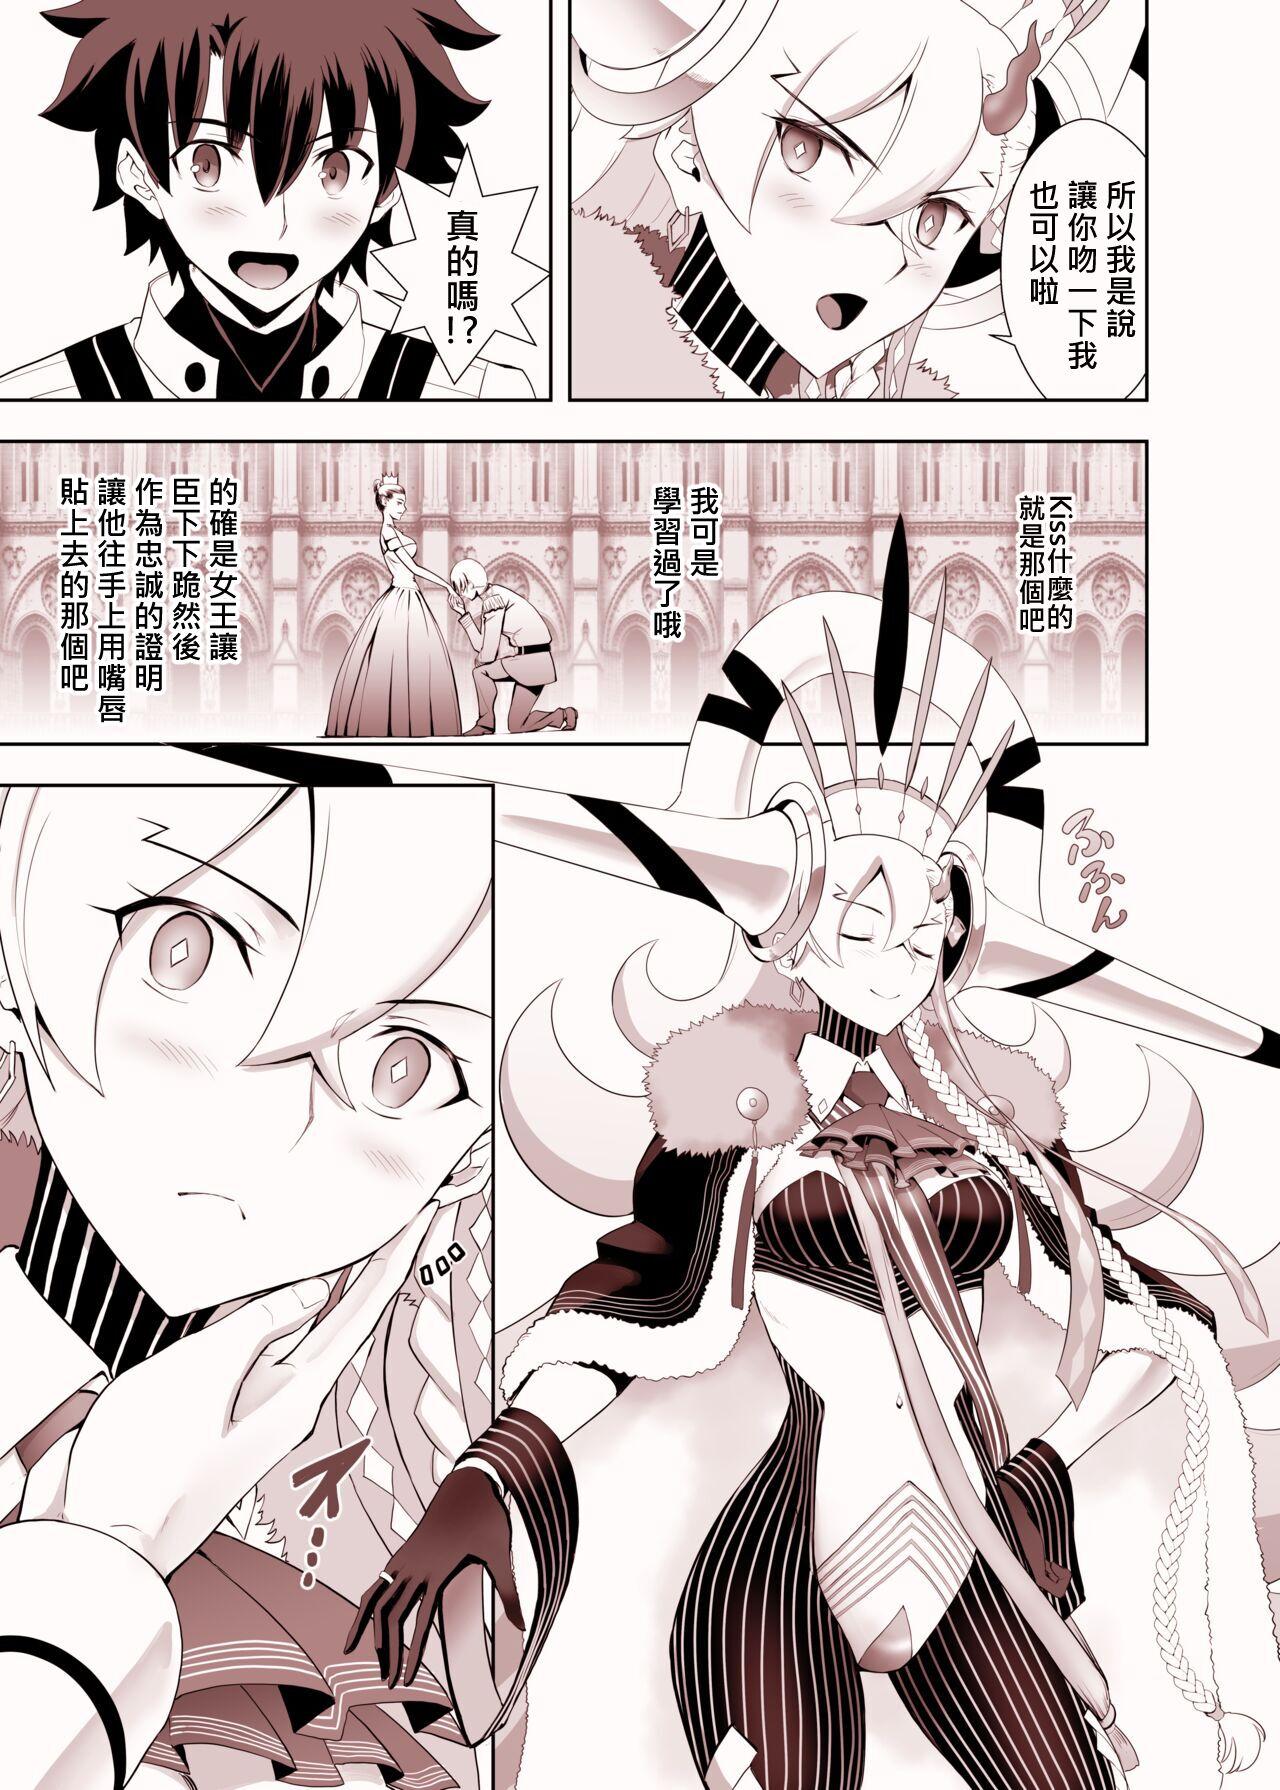 Perverted Lovely U - Fate grand order Hot Couple Sex - Page 4